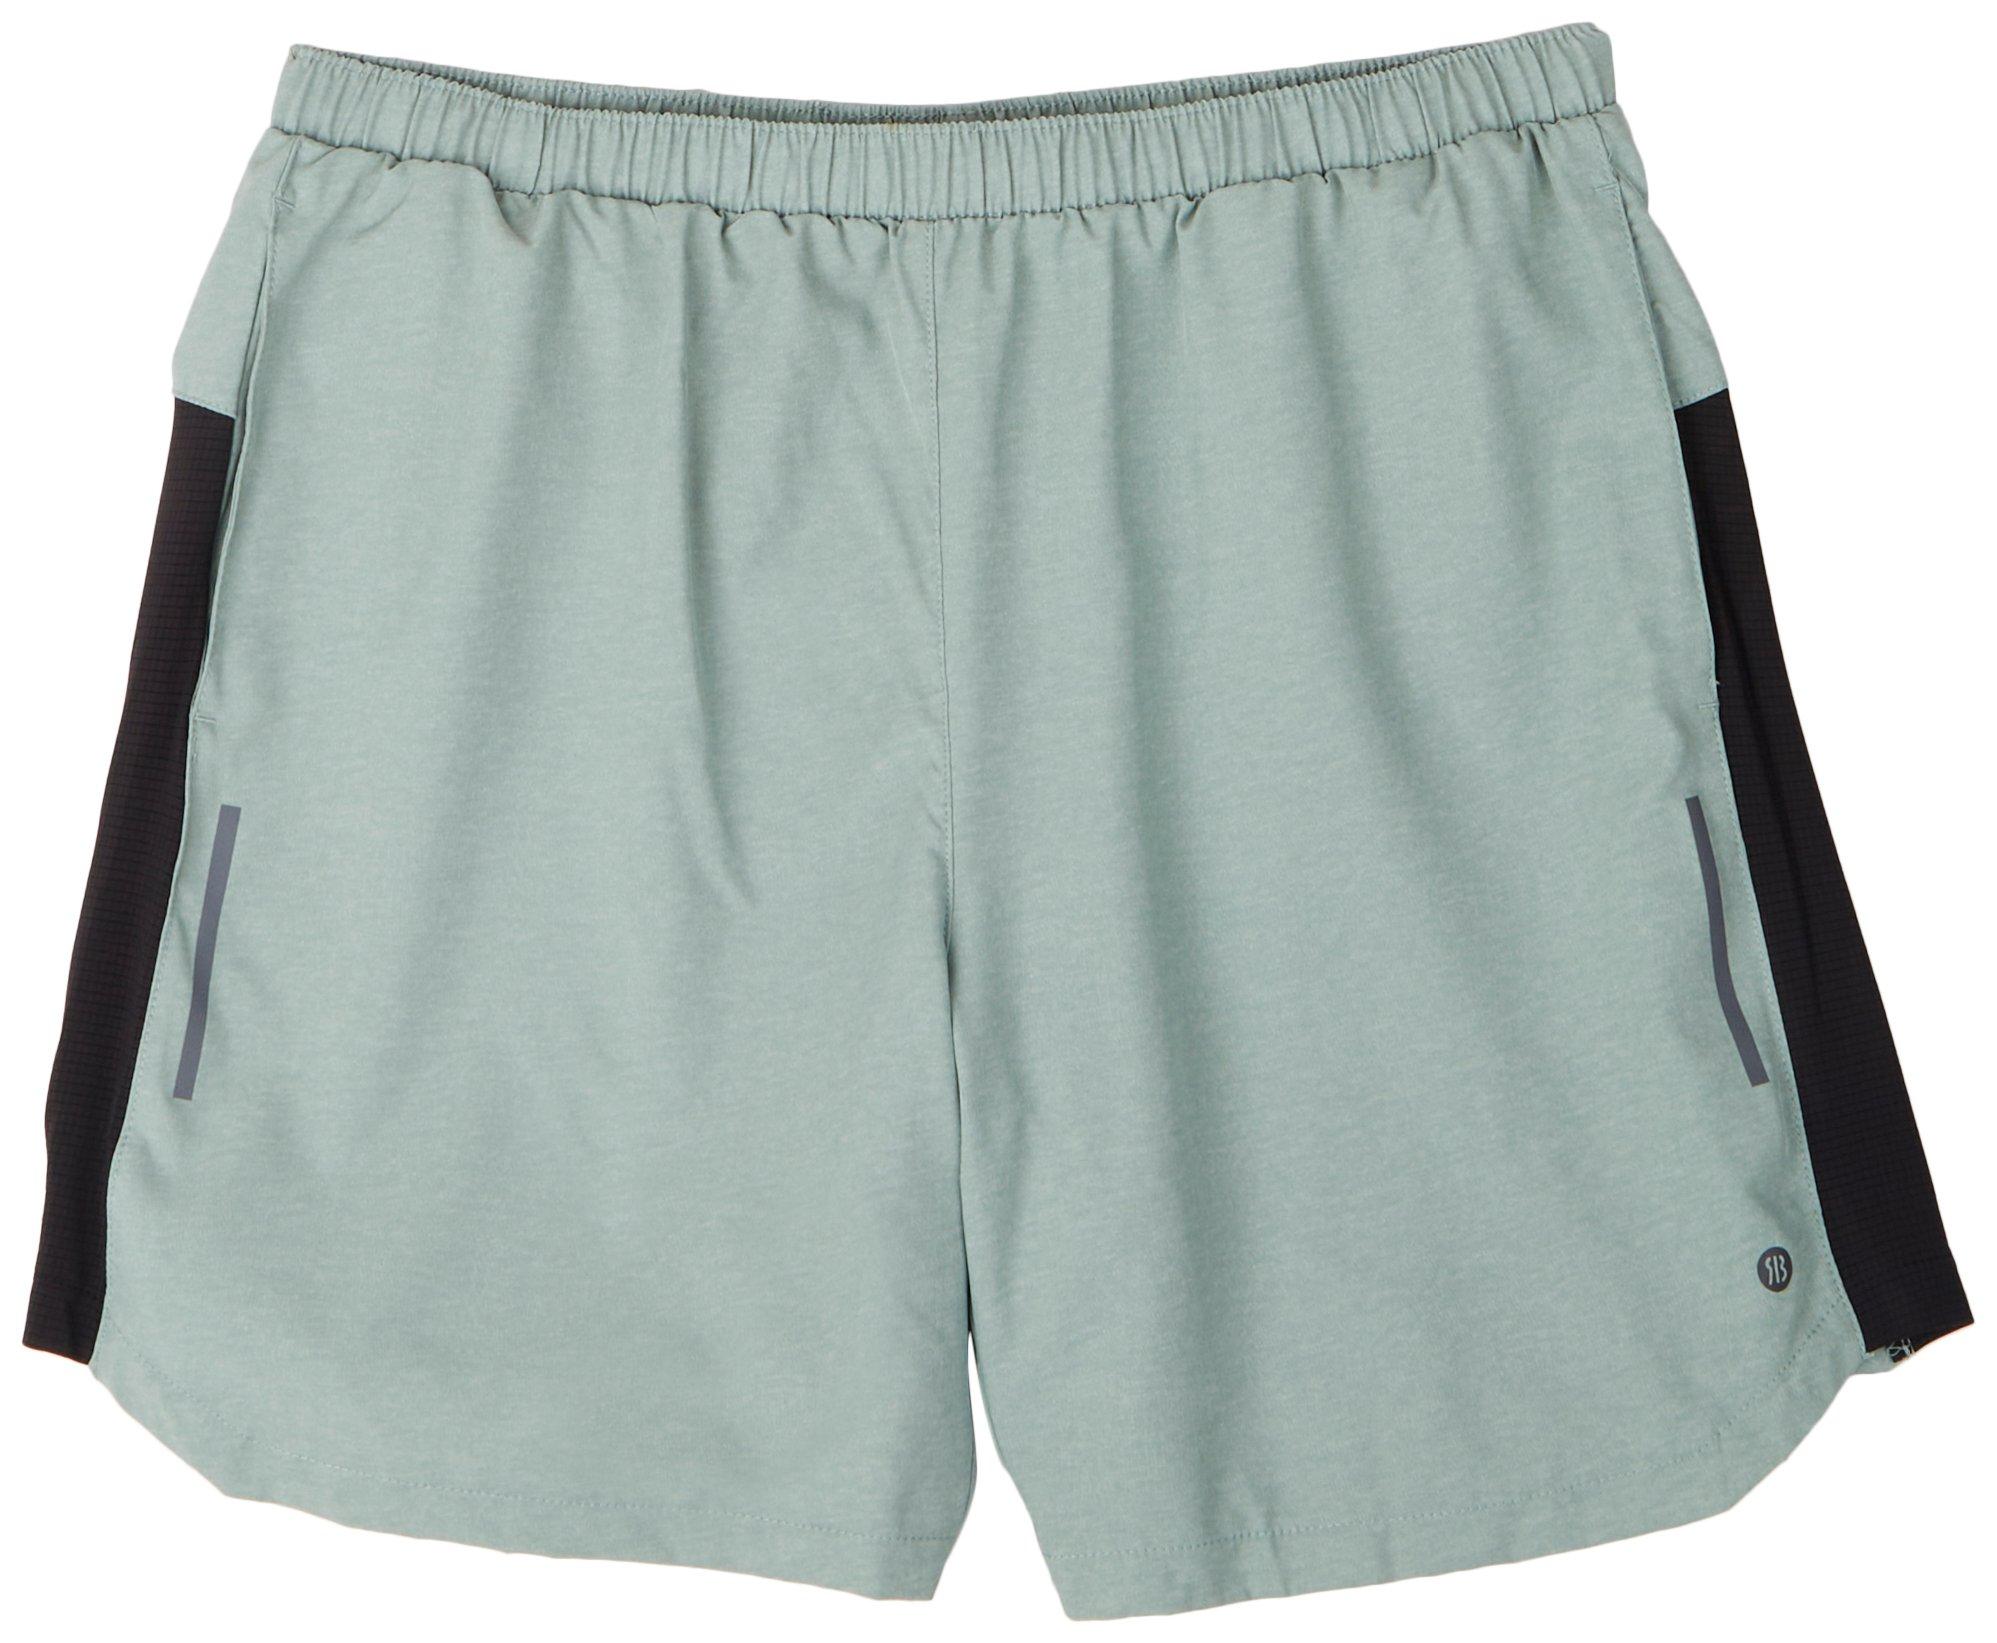 Mens 7 in. Solid 2-in-1 Brief Running Shorts